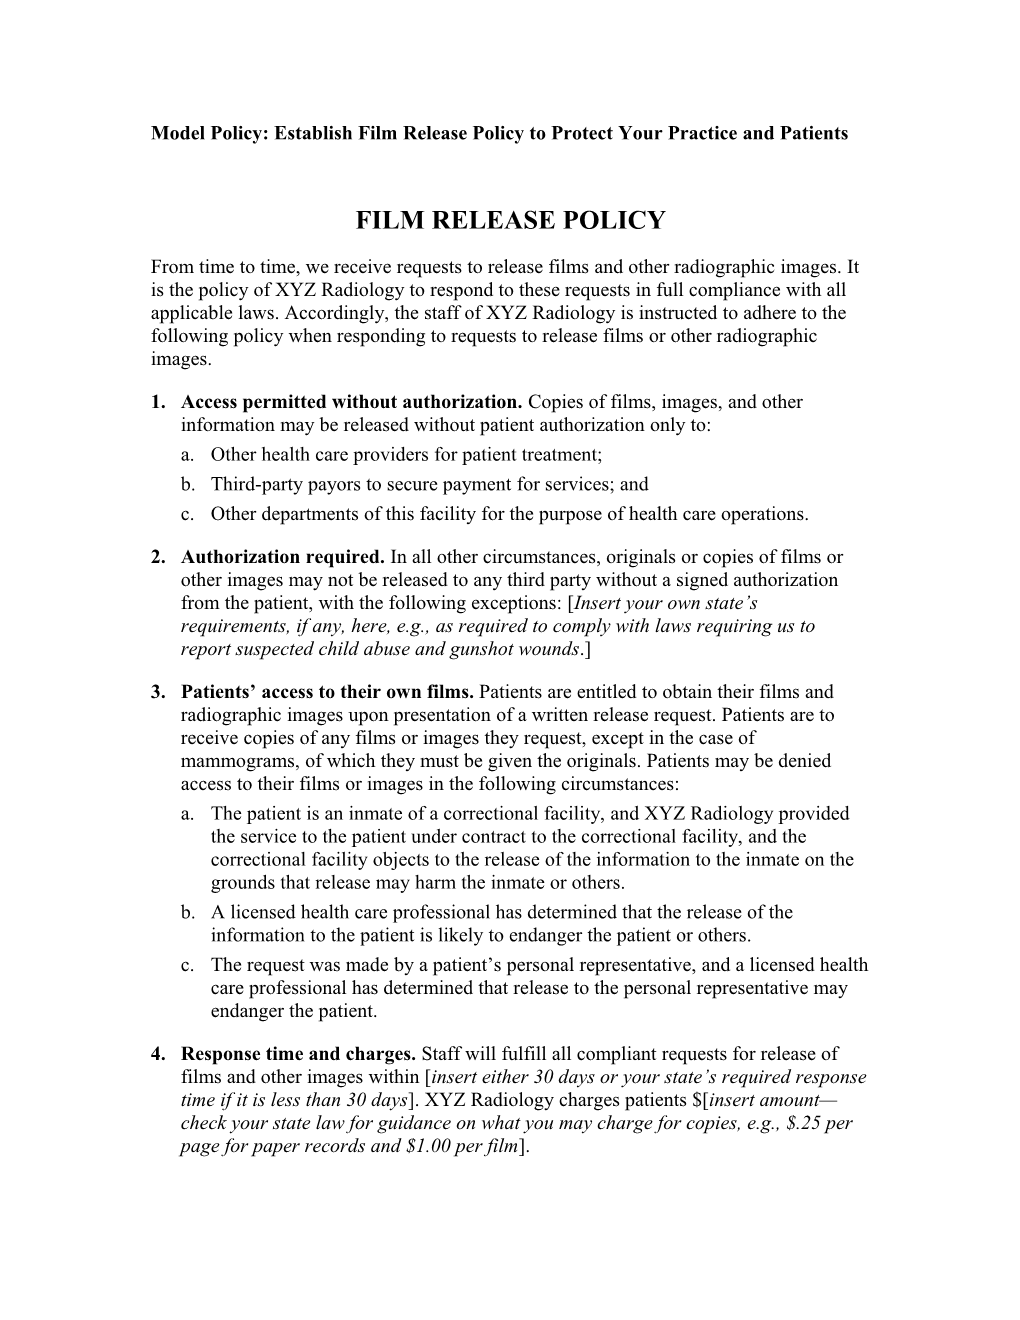 Model Policy: Establish Film Release Policy to Protect Your Practice and Patients